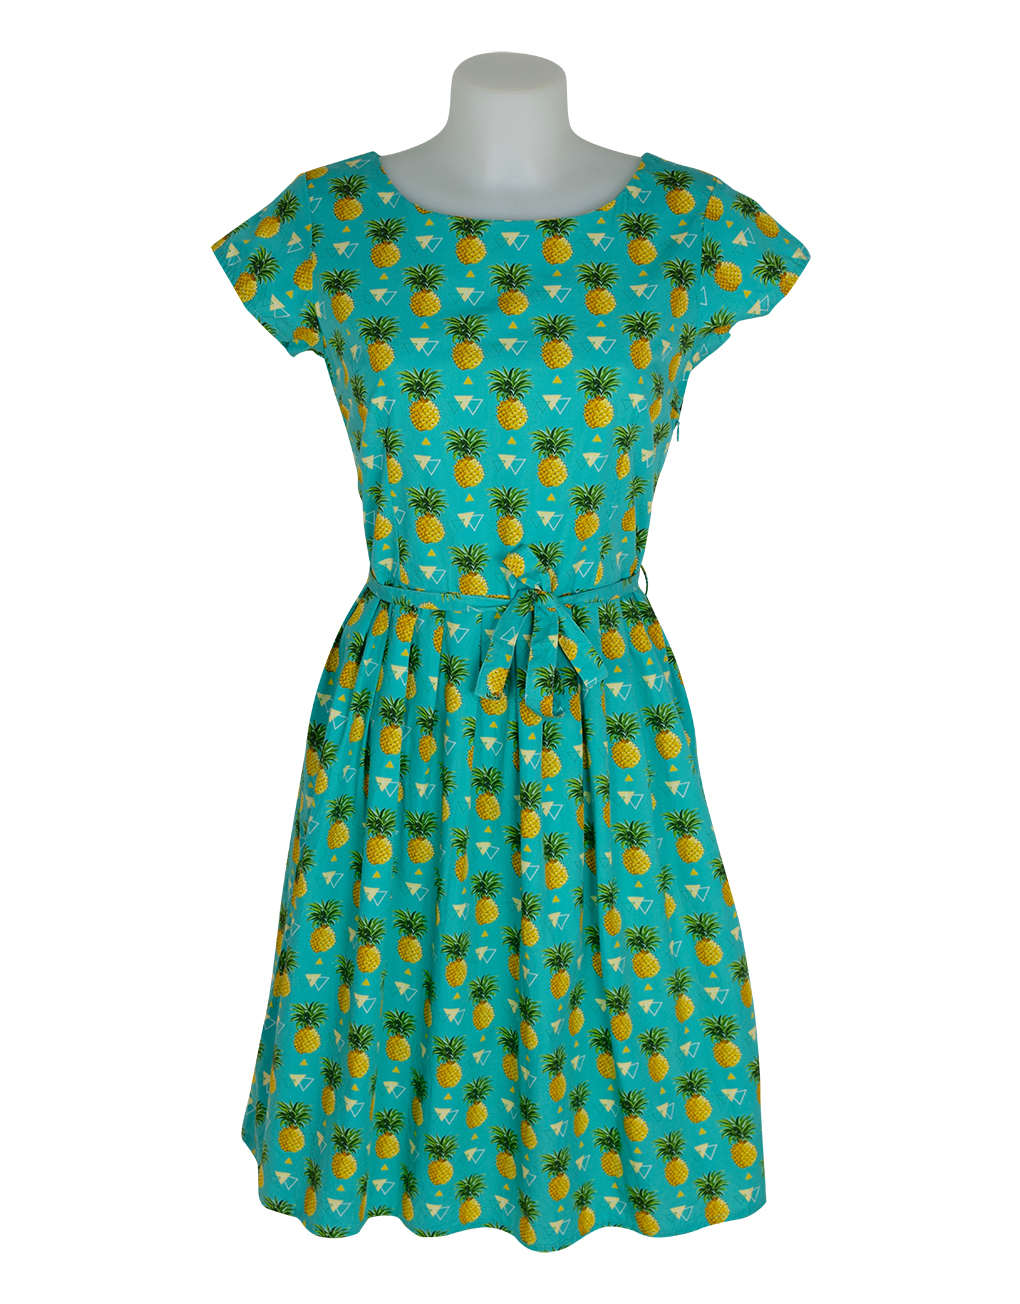 Run&Fly Teal Dress with Repeat Triangle & Pineapple Print